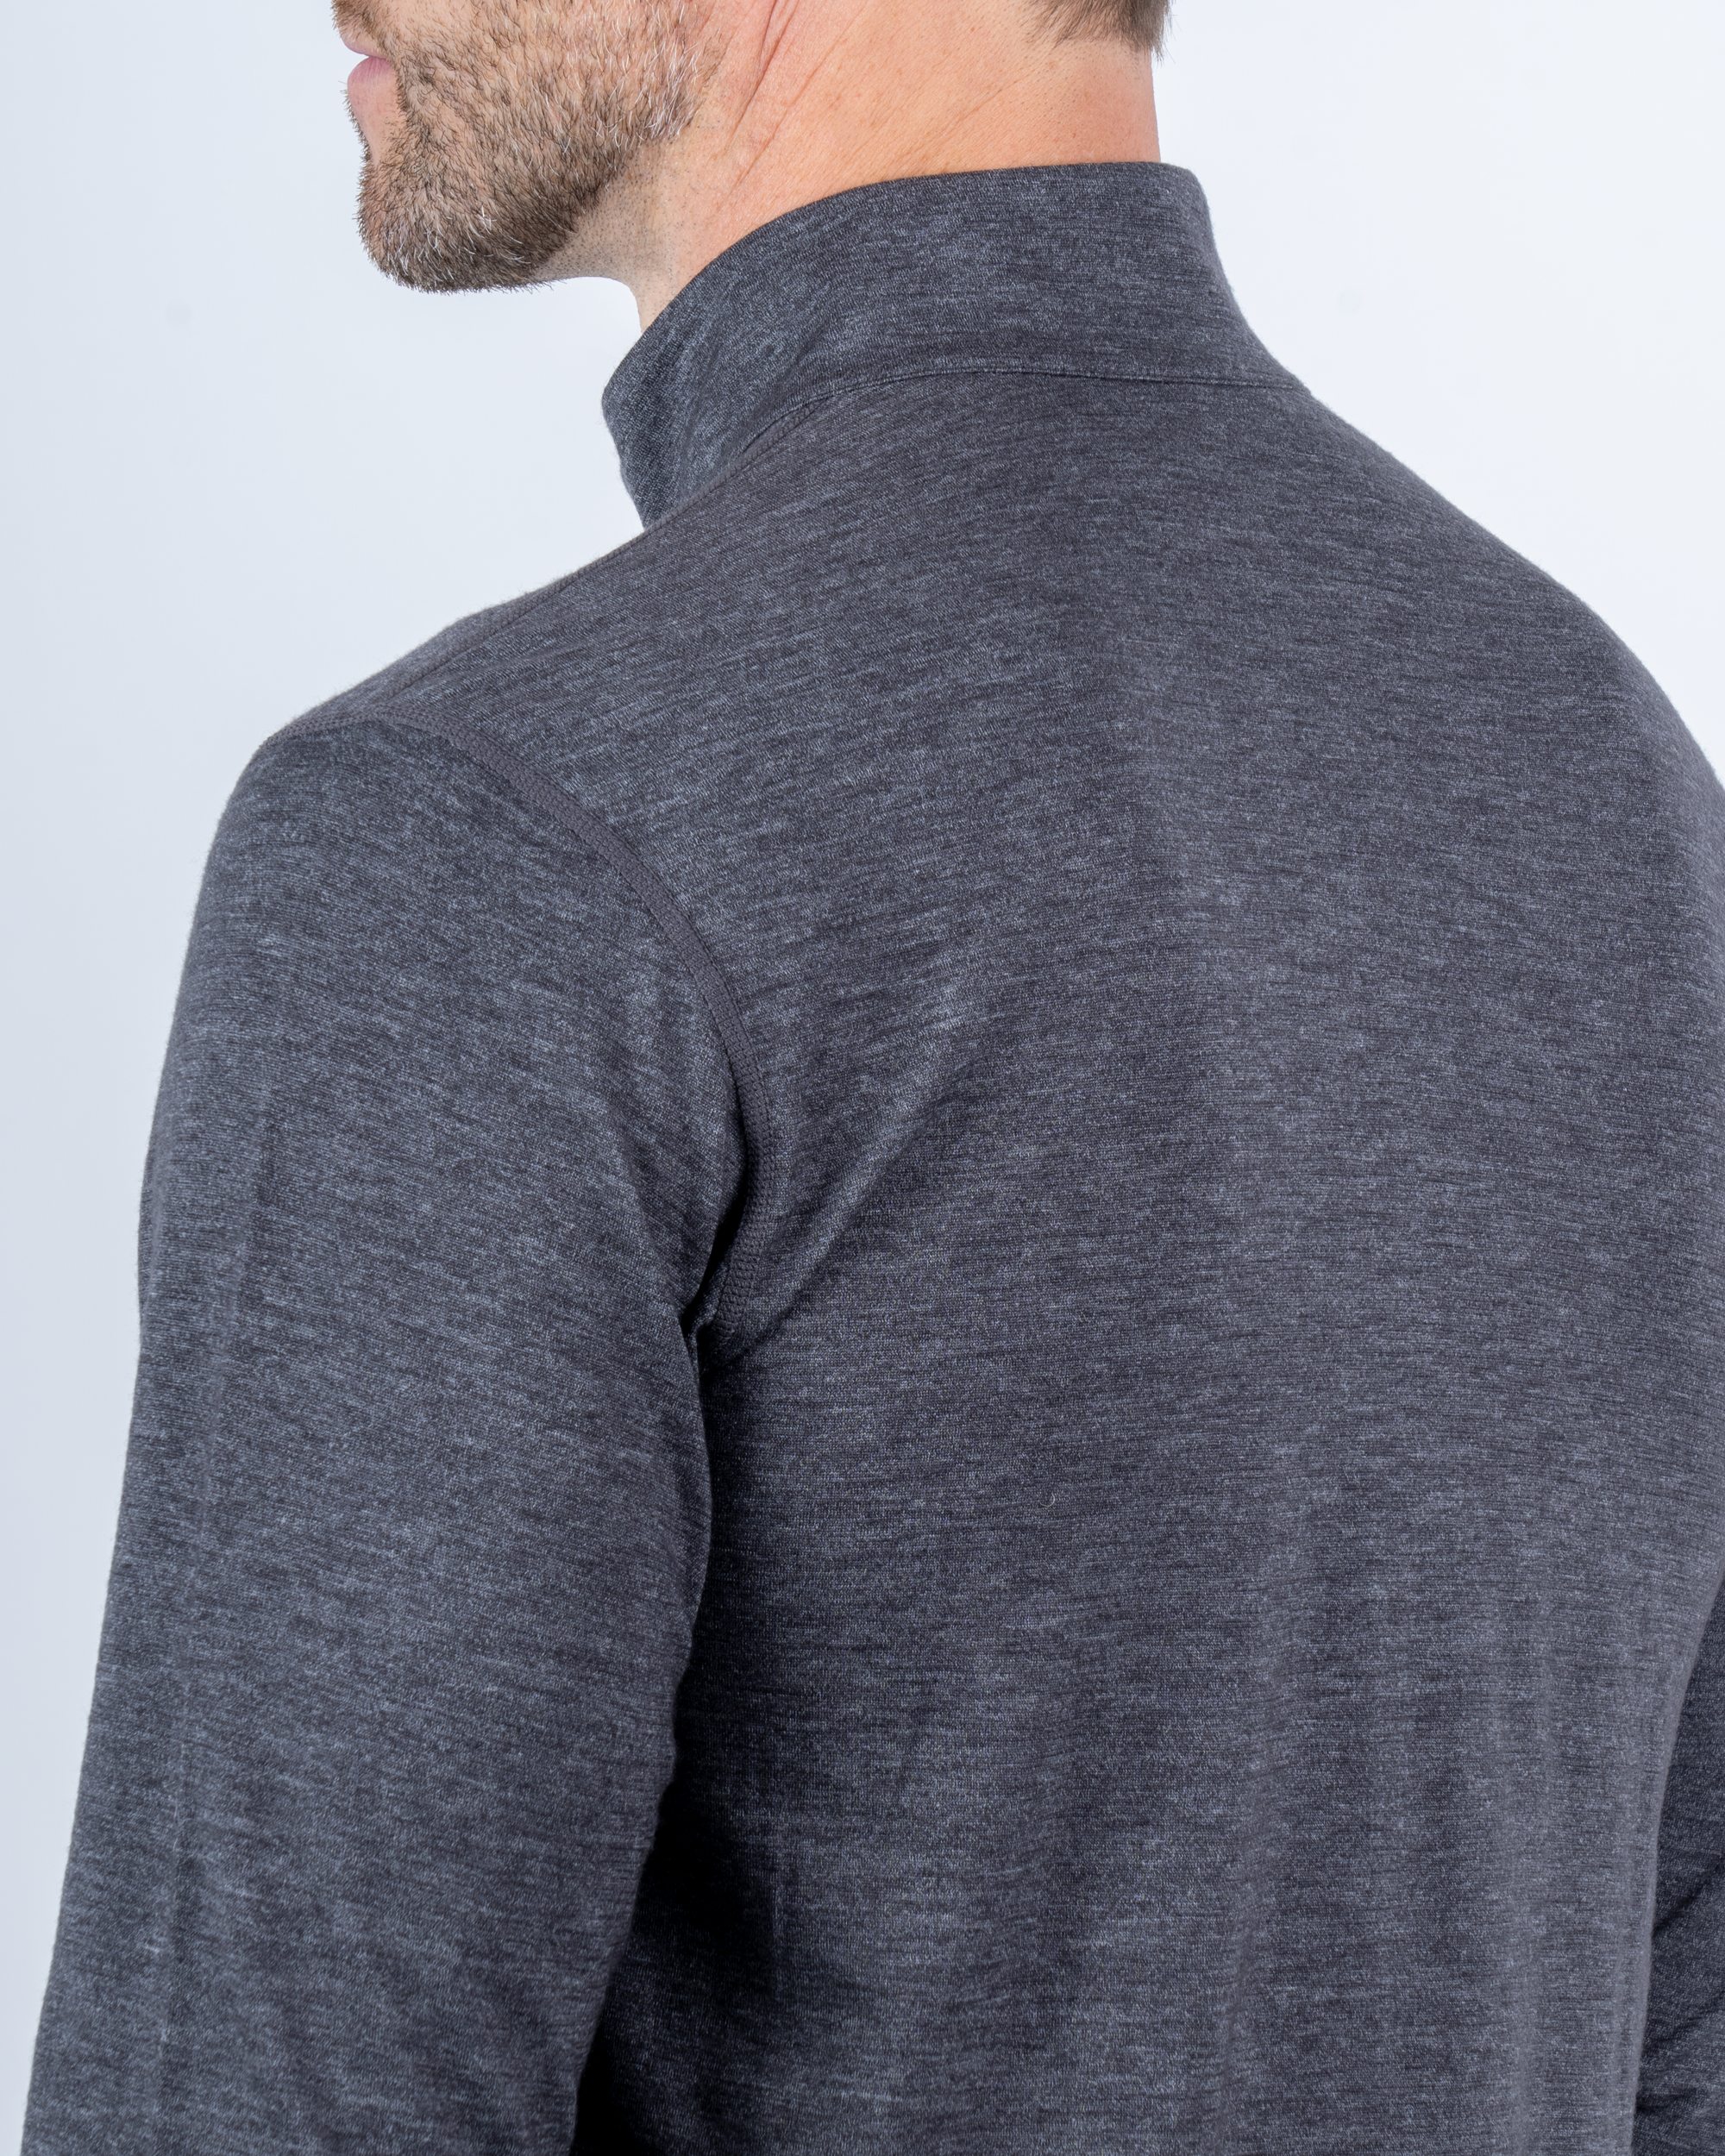 Foreign Rider Co Nuyarn Merino Wool Grey Quarter Zip Sweater Back Shoulder and Neck Detail